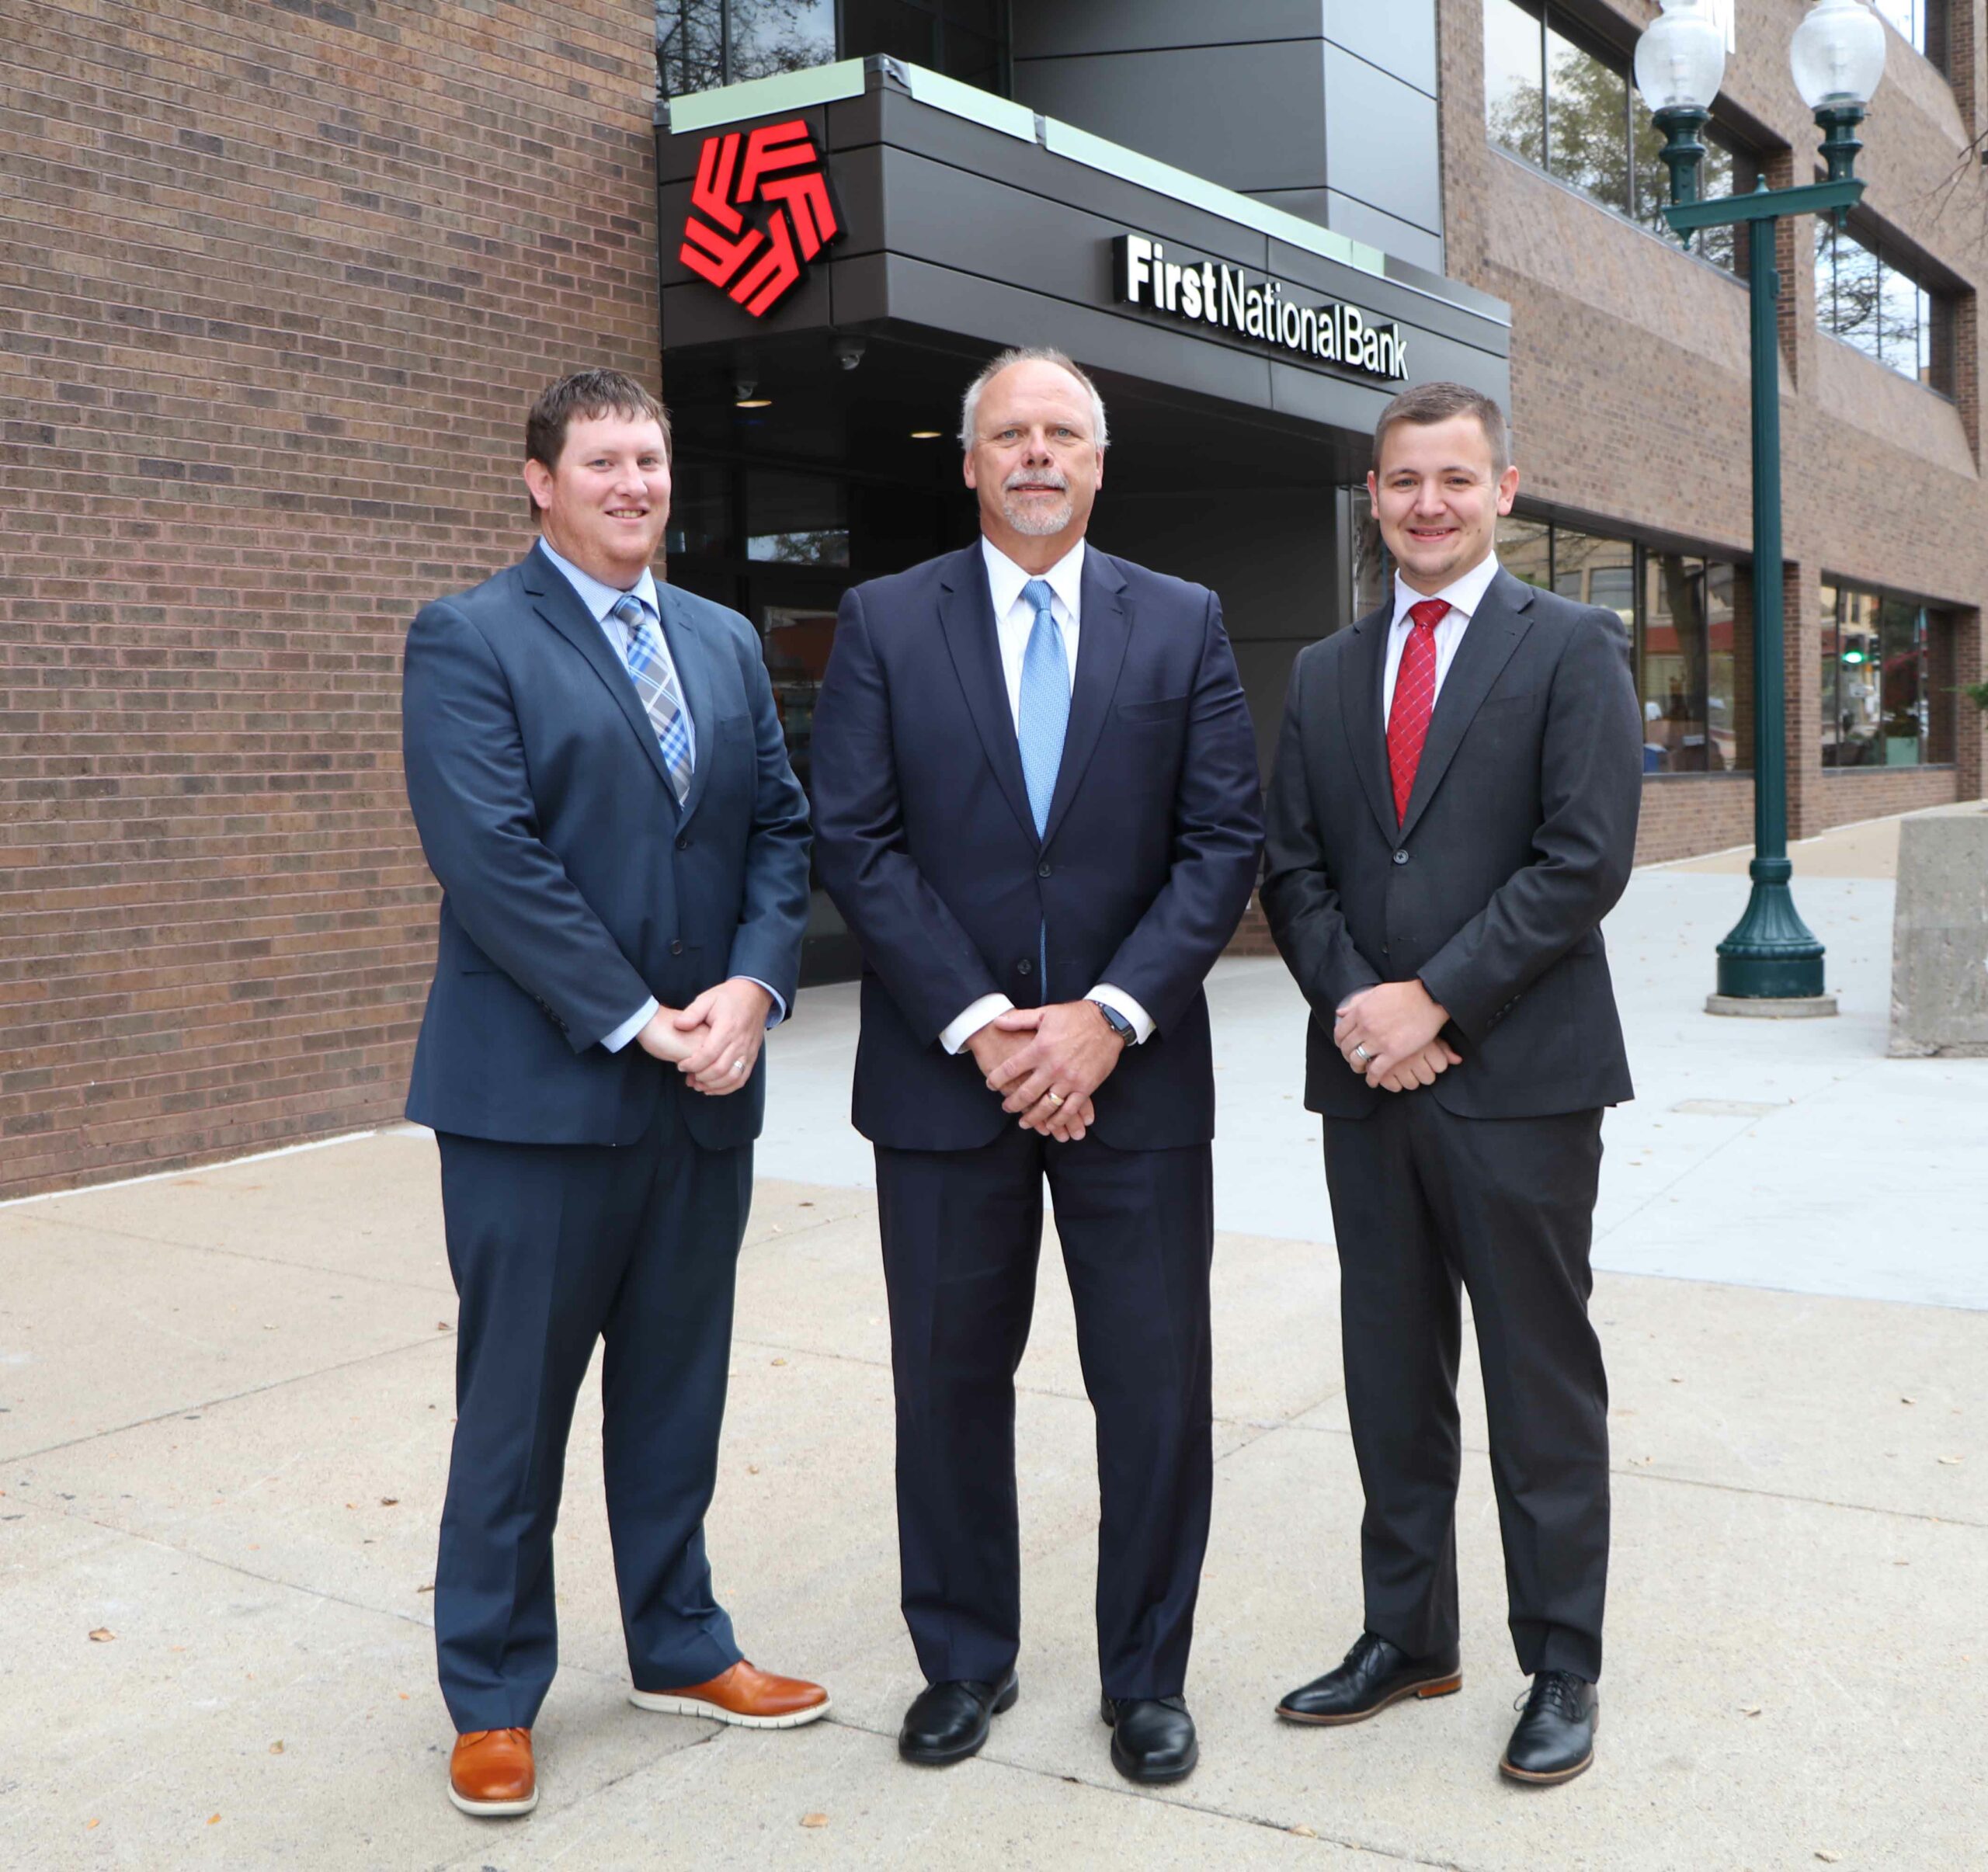 Business Bankers Derek Simonsen, Russ Robers, and Justin Zandstra pose for a team picture in front of First National Bank.